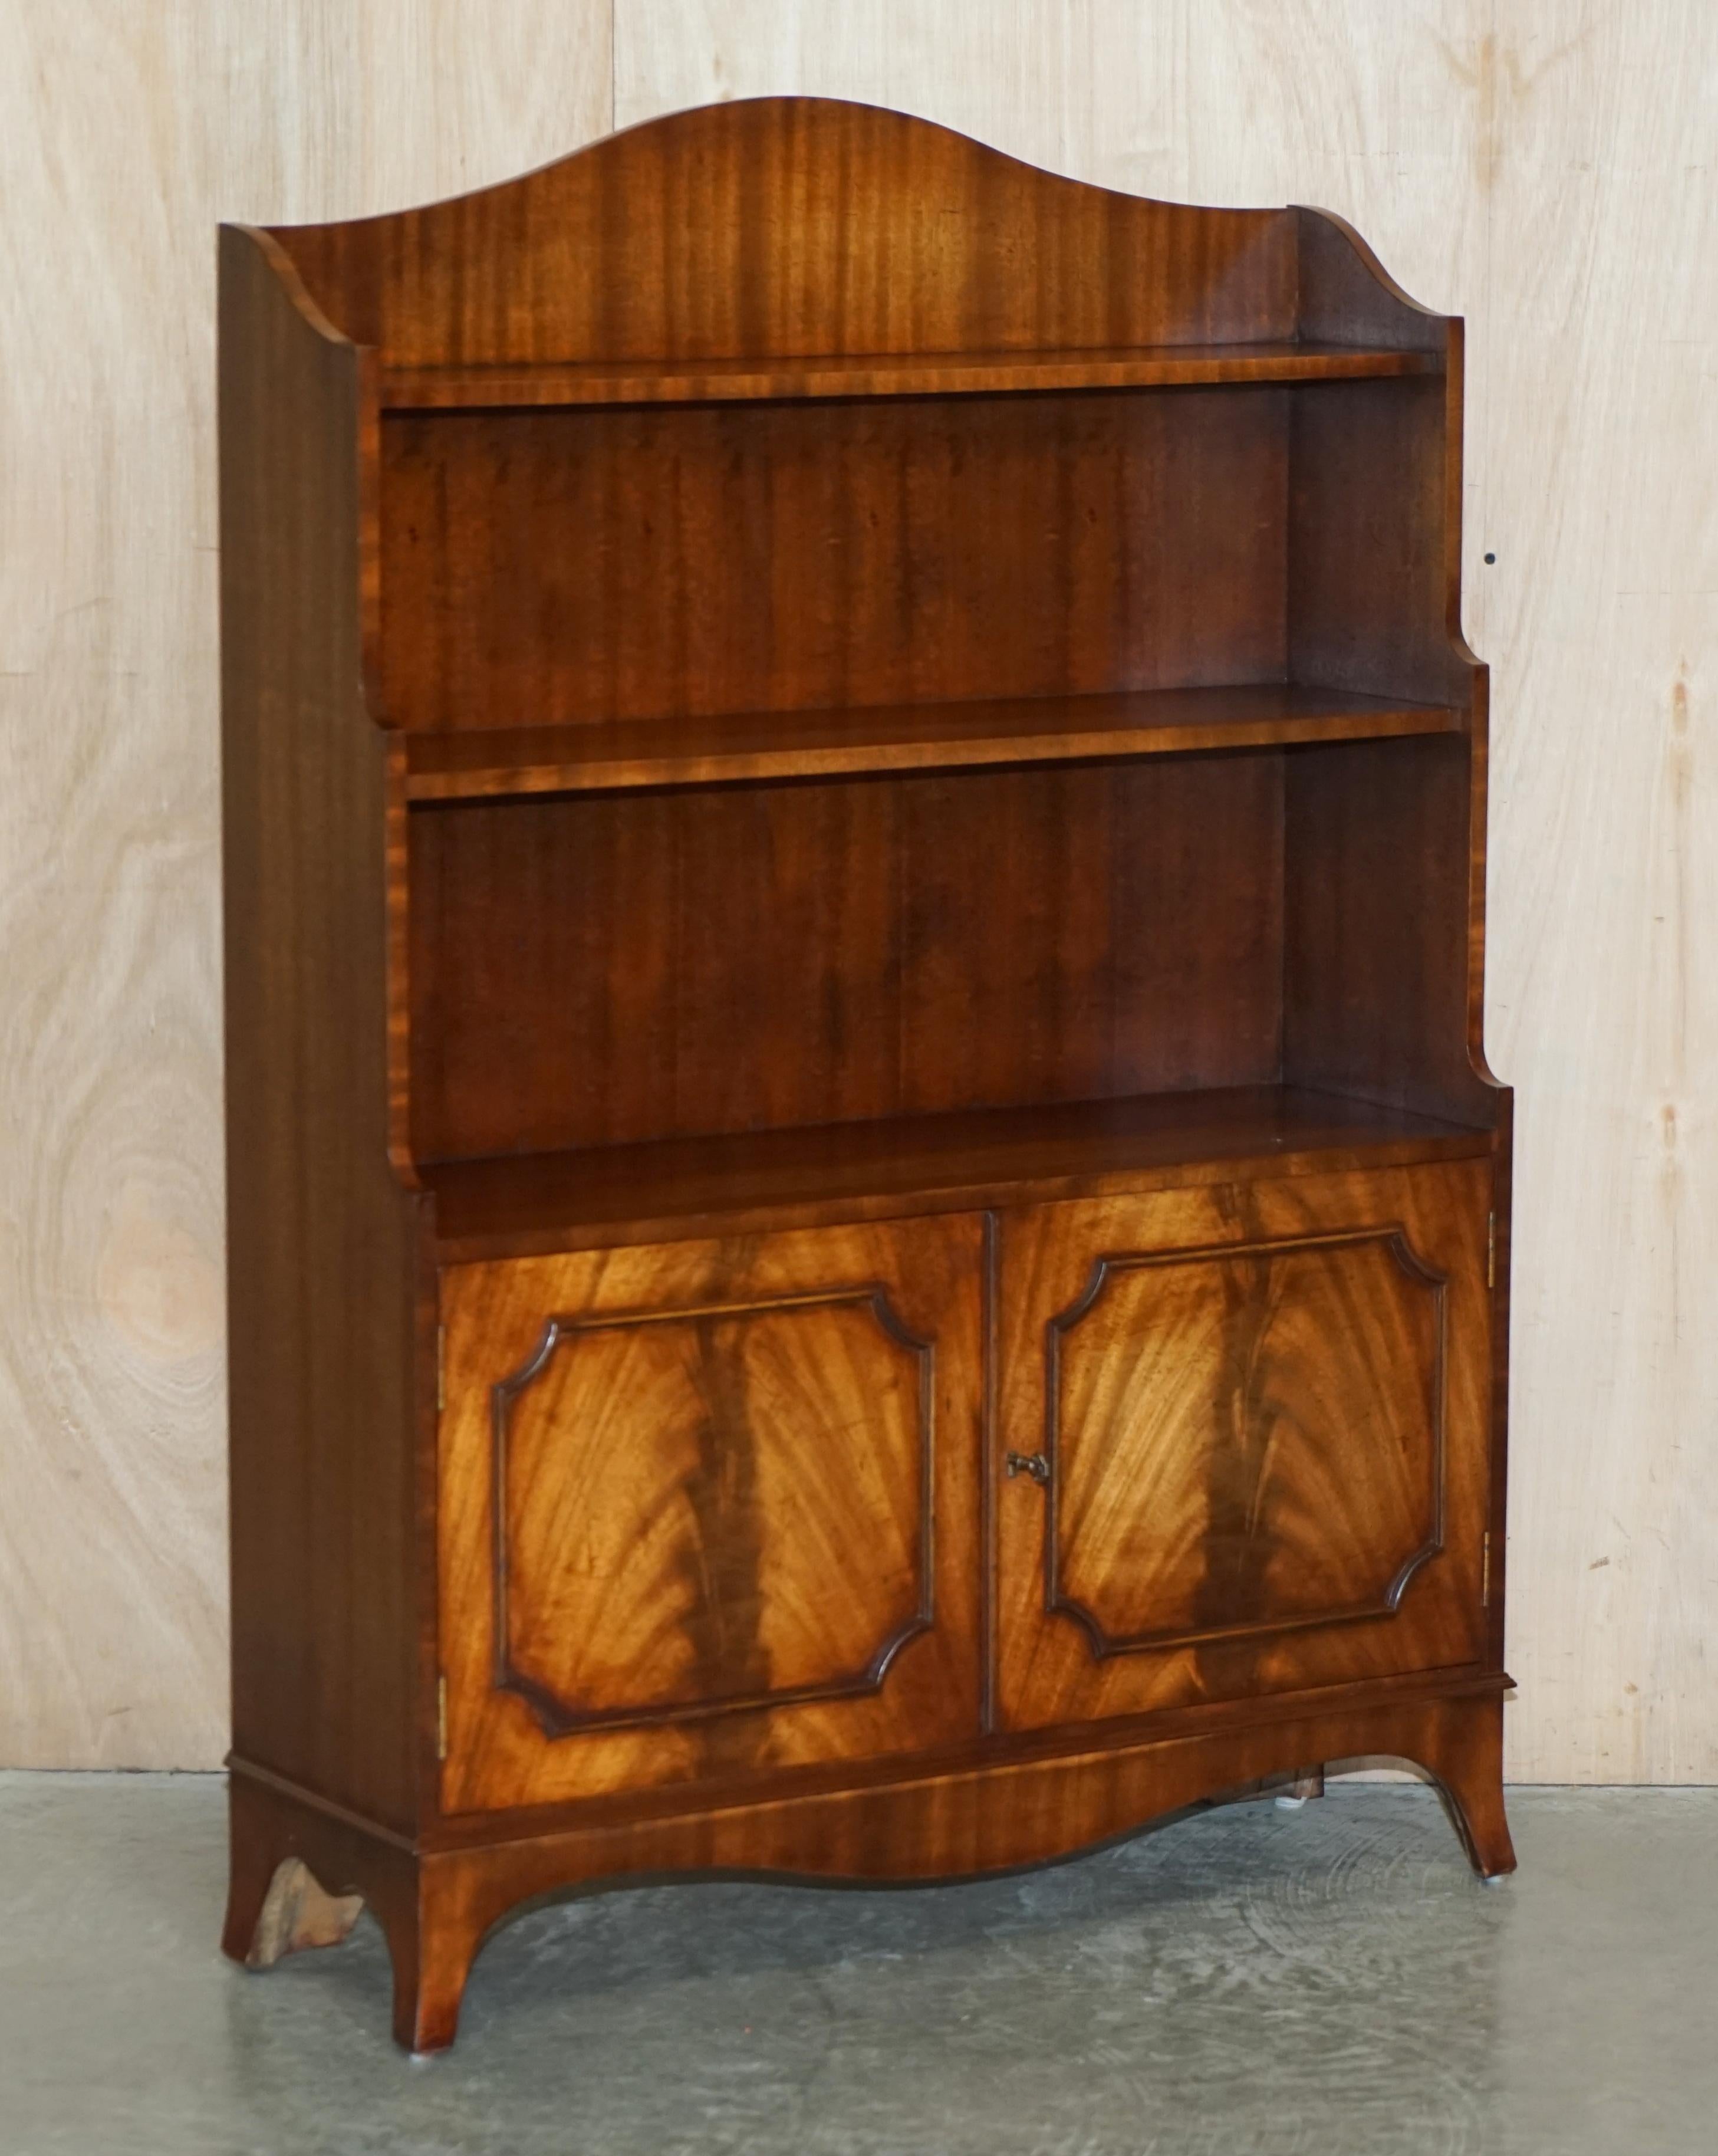 We are delighted to offer for sale this absolutely stunning pair of circa 1950 Flamed Mahogany dwarf open Library bookcases cupboard bases.

A very good looking and well-made pair, extremely decorative and very rare to find a perfect matching